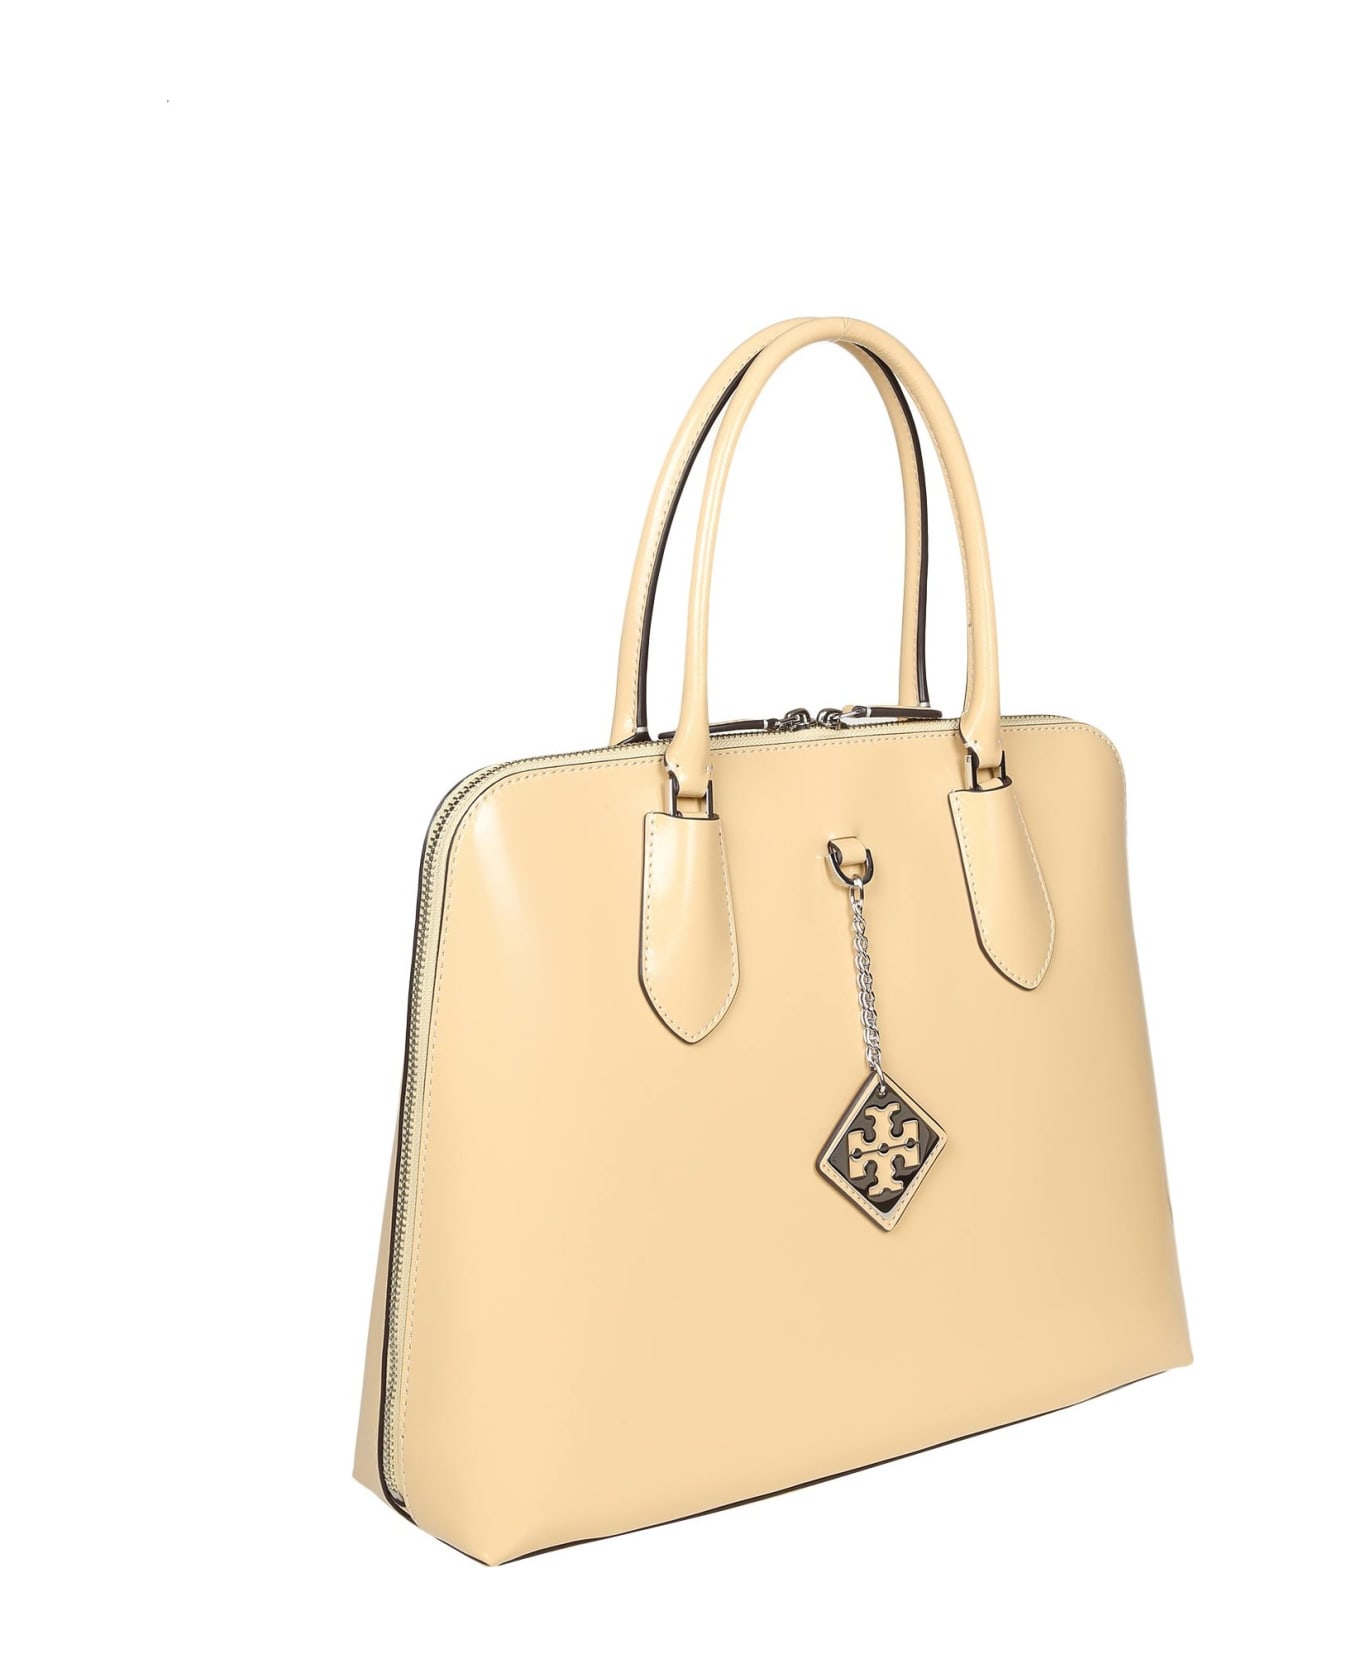 Tory Burch Swing Bag In Almond Brushed Leather - Almond トートバッグ